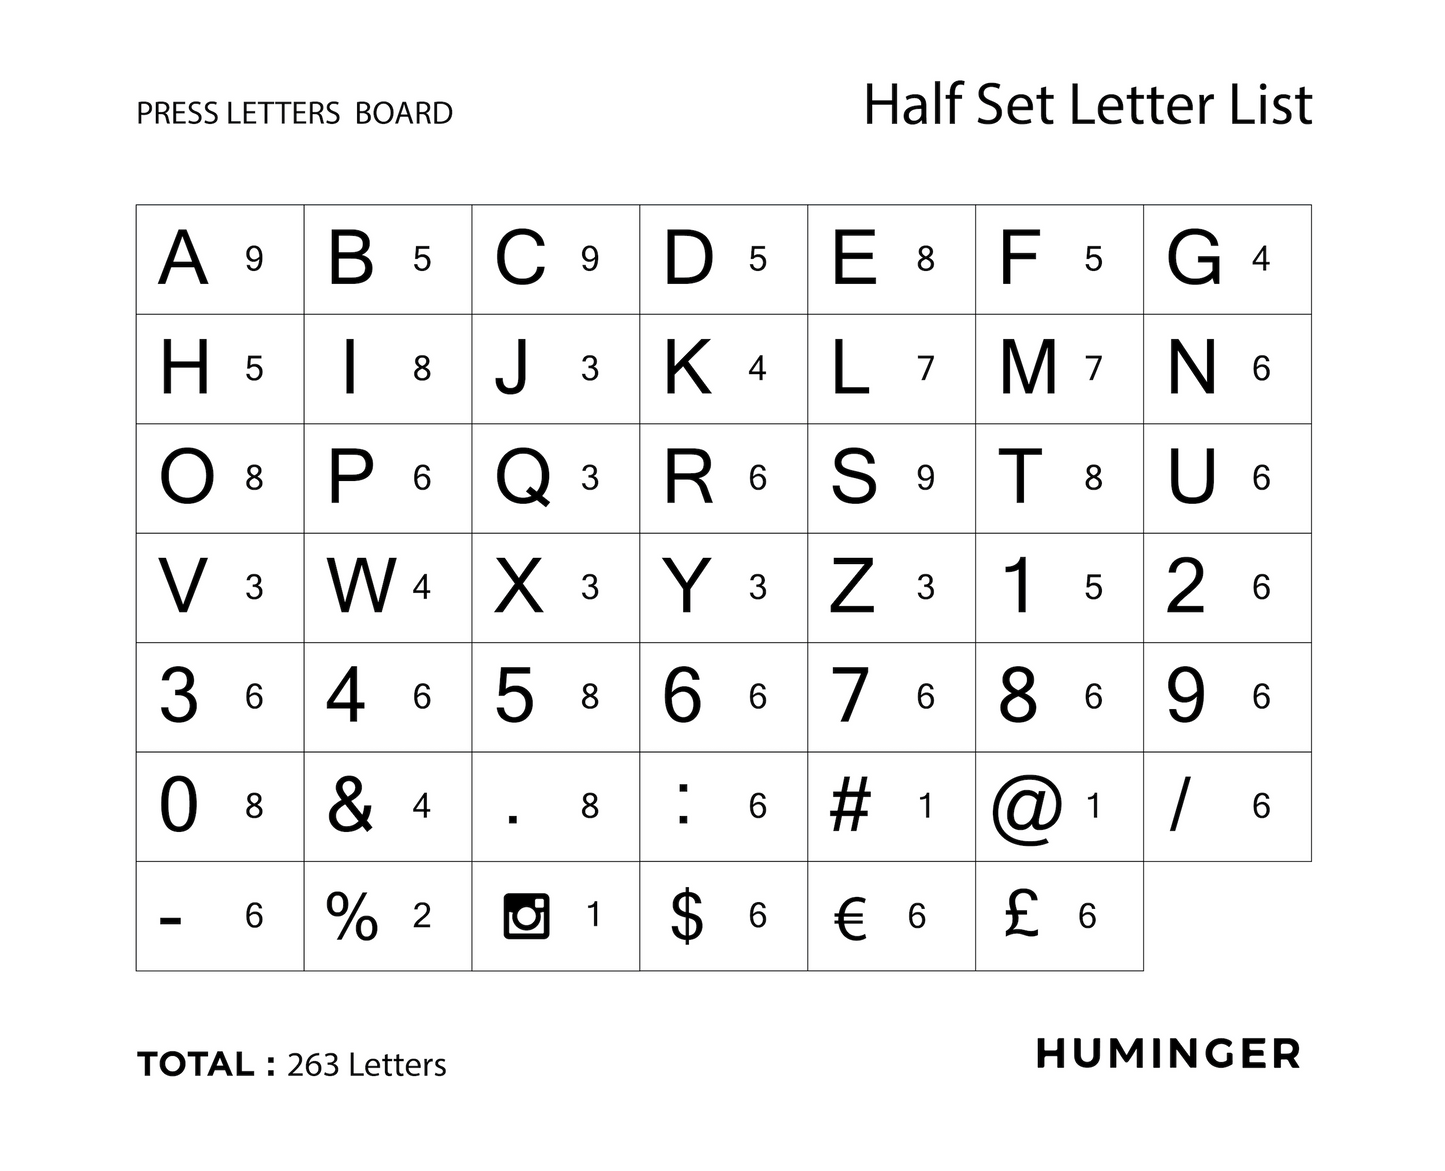 Extra Press Letters Set - Letters Without Rails